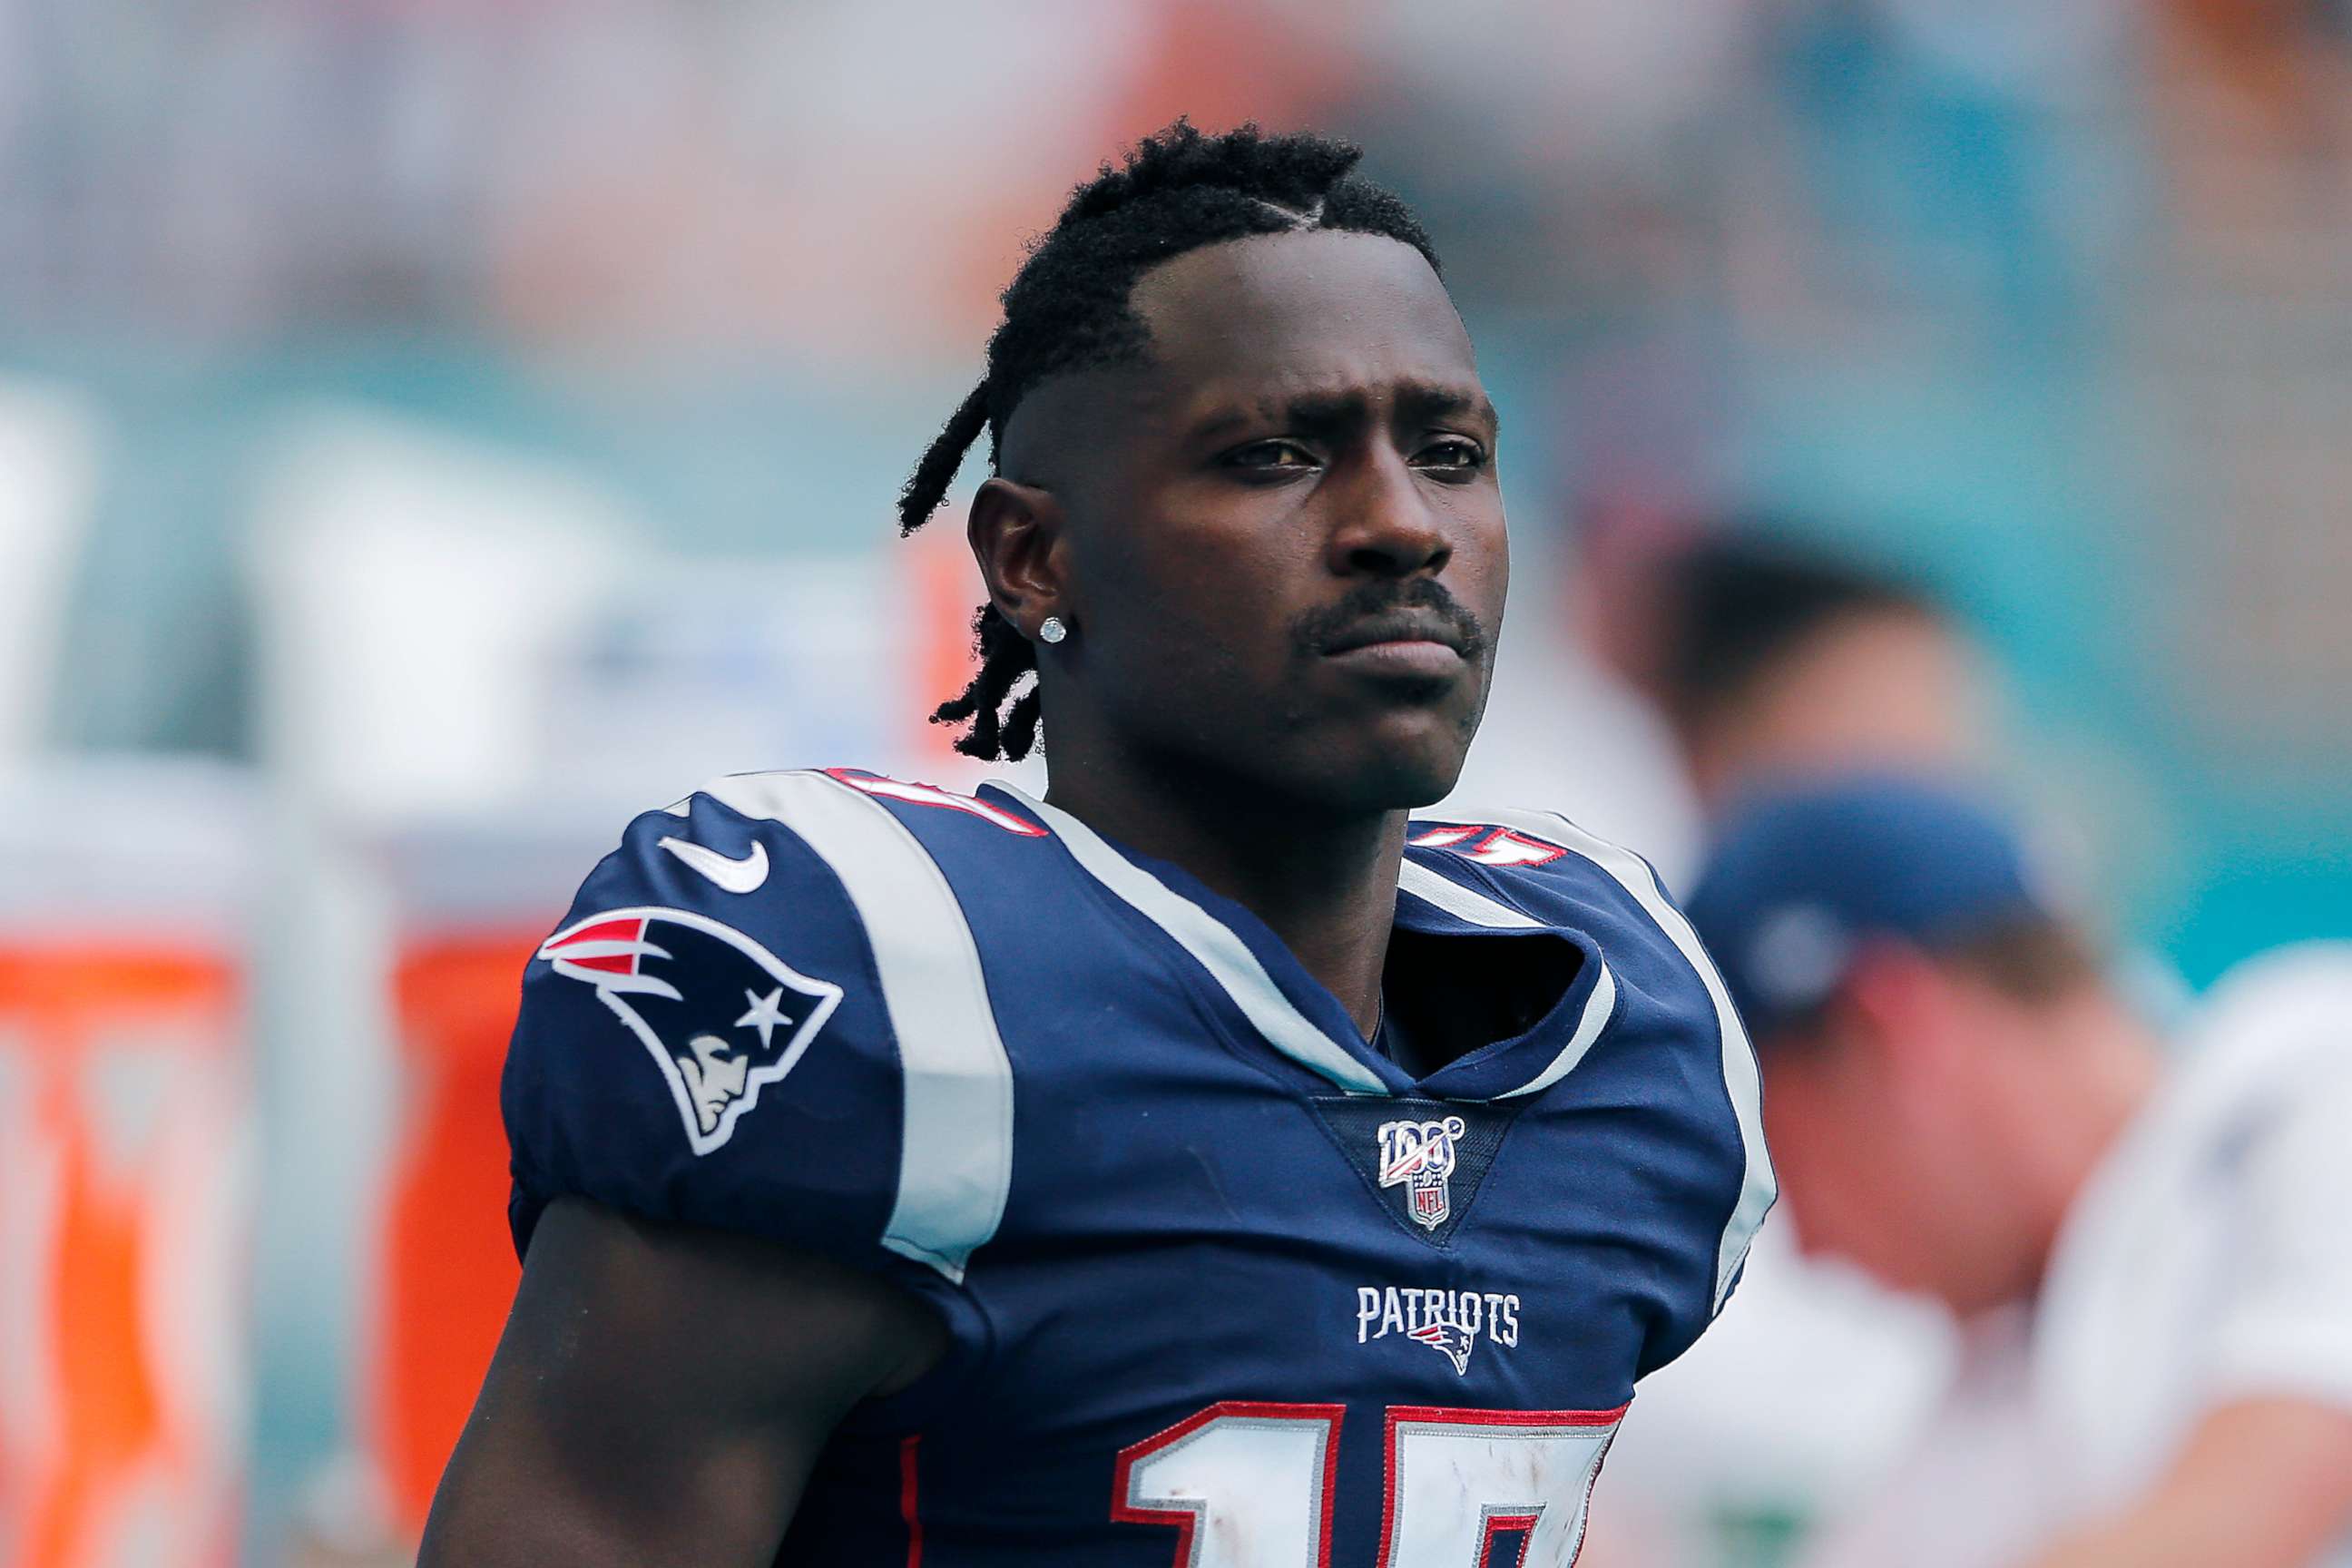 PHOTO: Antonio Brown #17 of the New England Patriots looks on against the Miami Dolphins, Sept. 15, 2019 in Miami. 